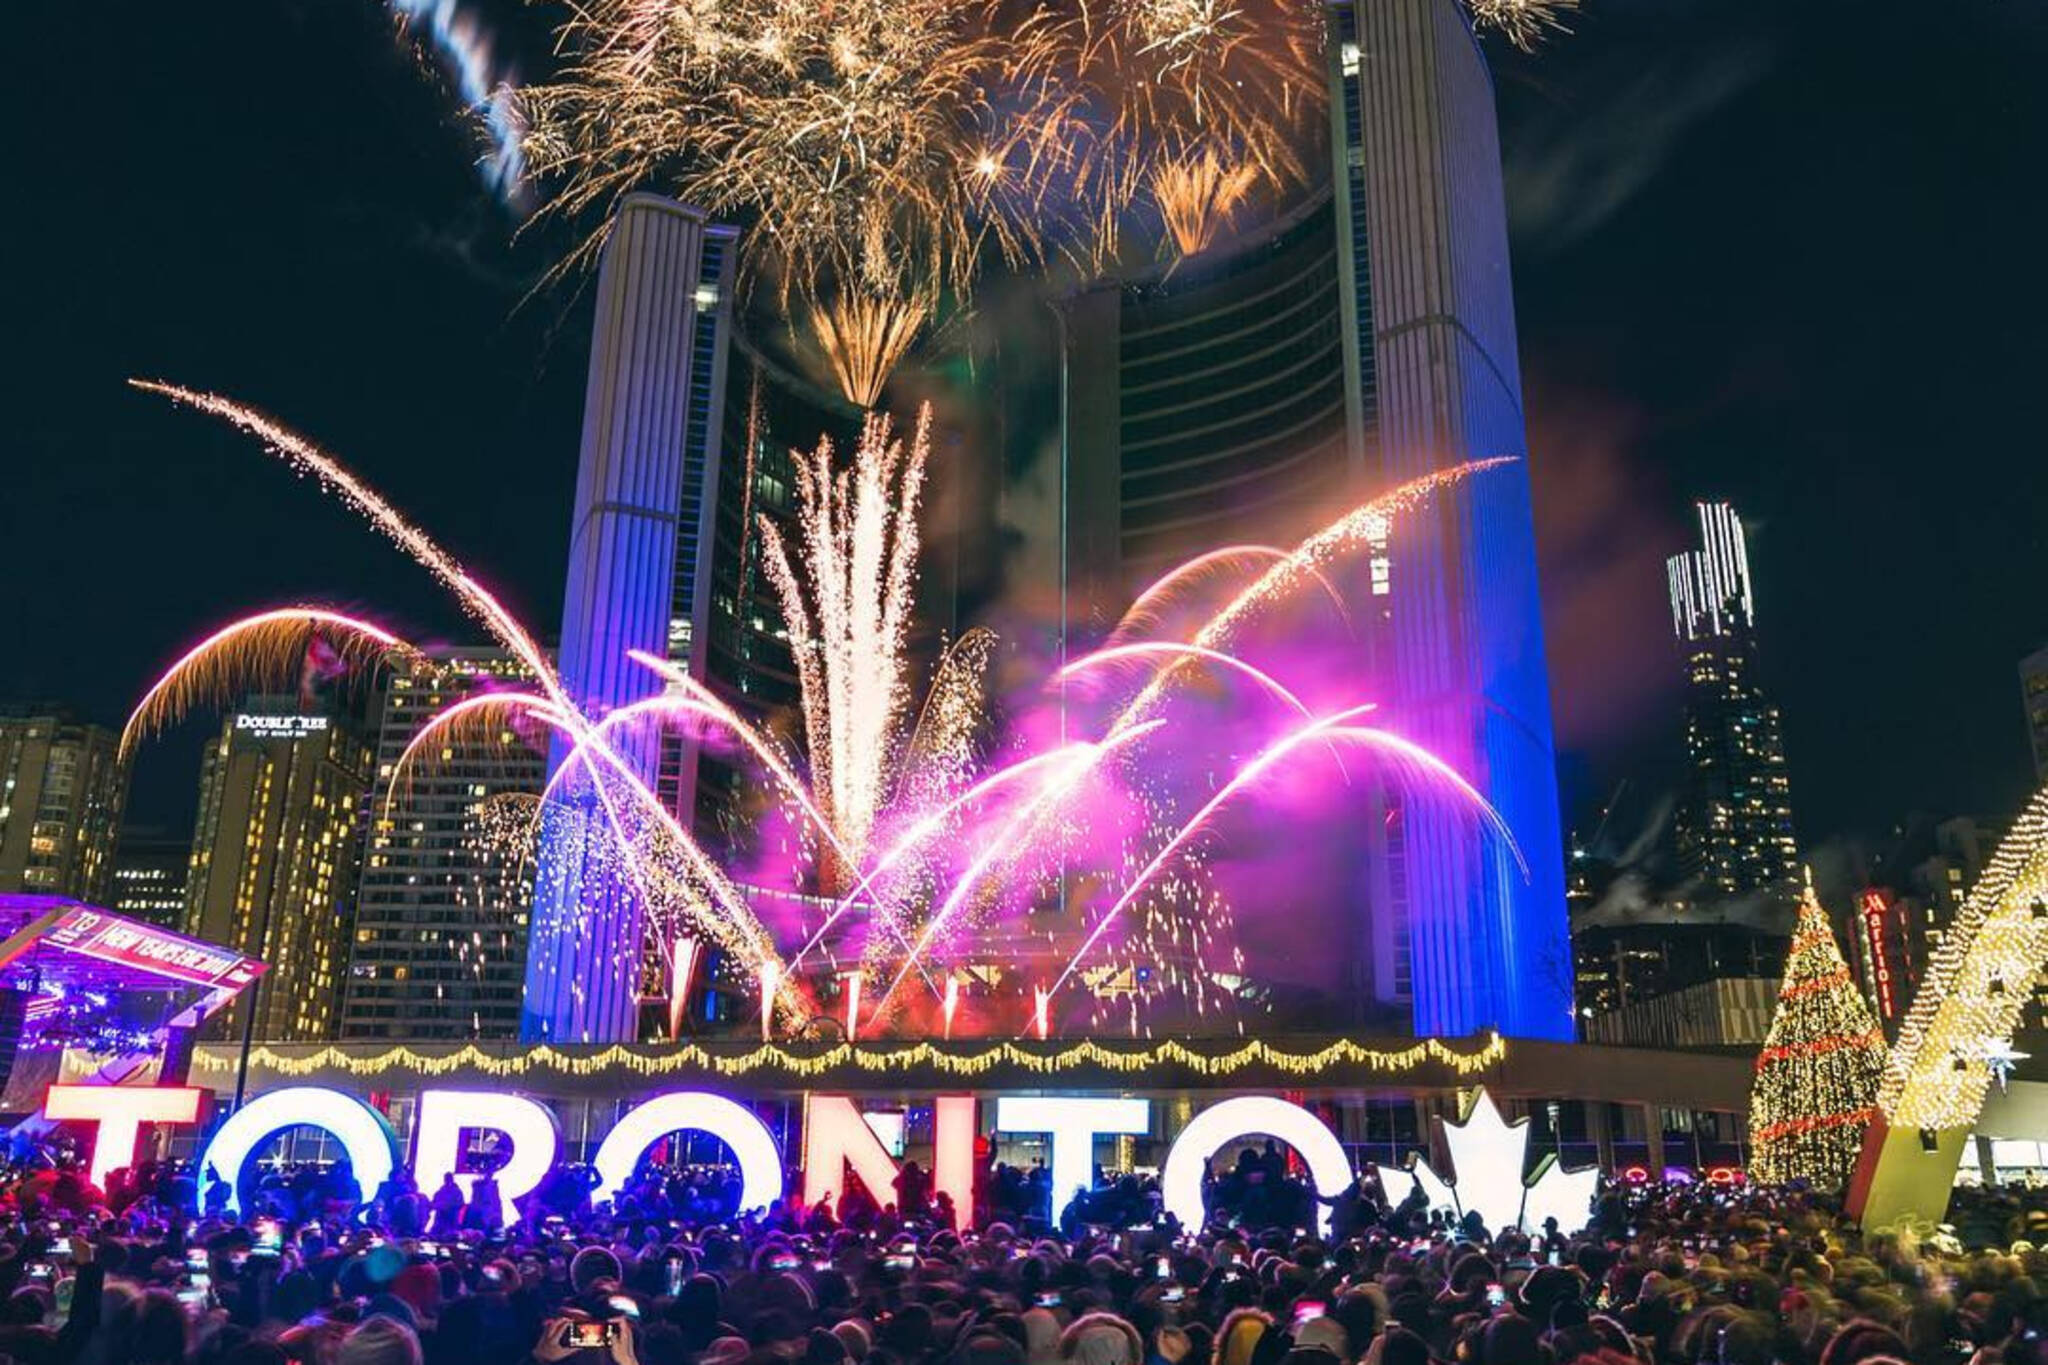 This is what New Year's looked like in Toronto